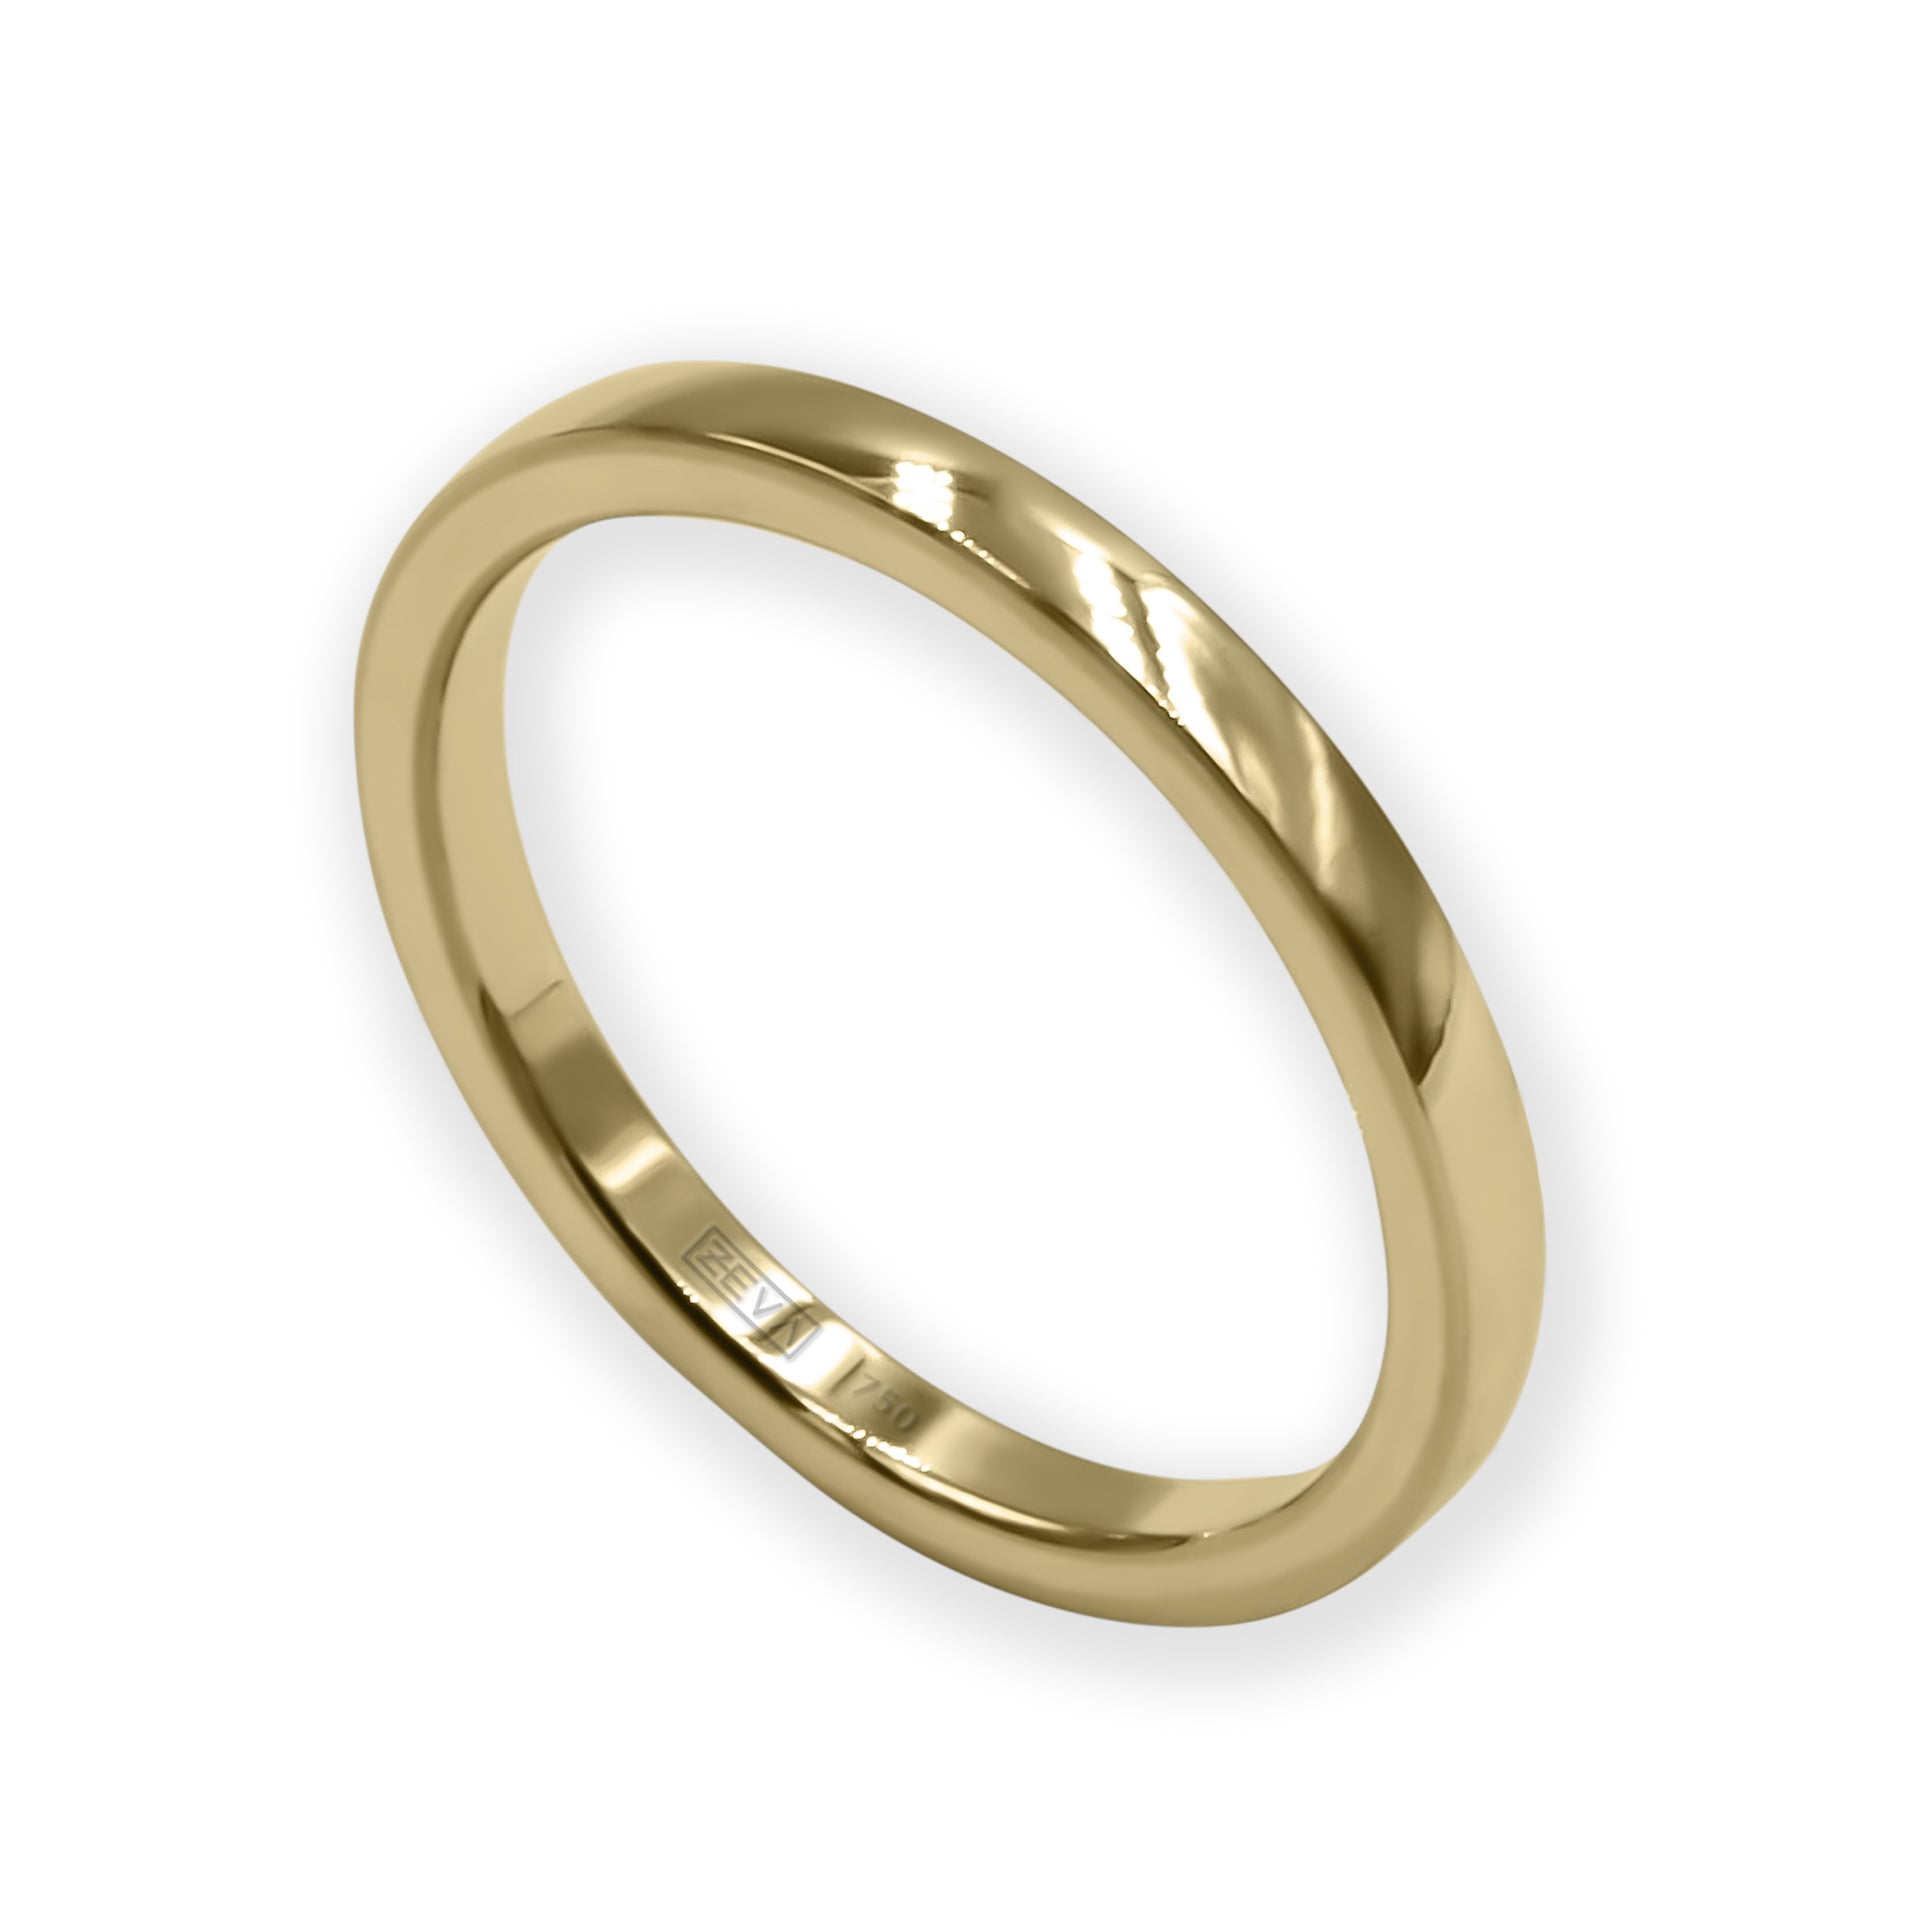 Bague EARTH IS ROUND 2mm profil rond or jaune 18k